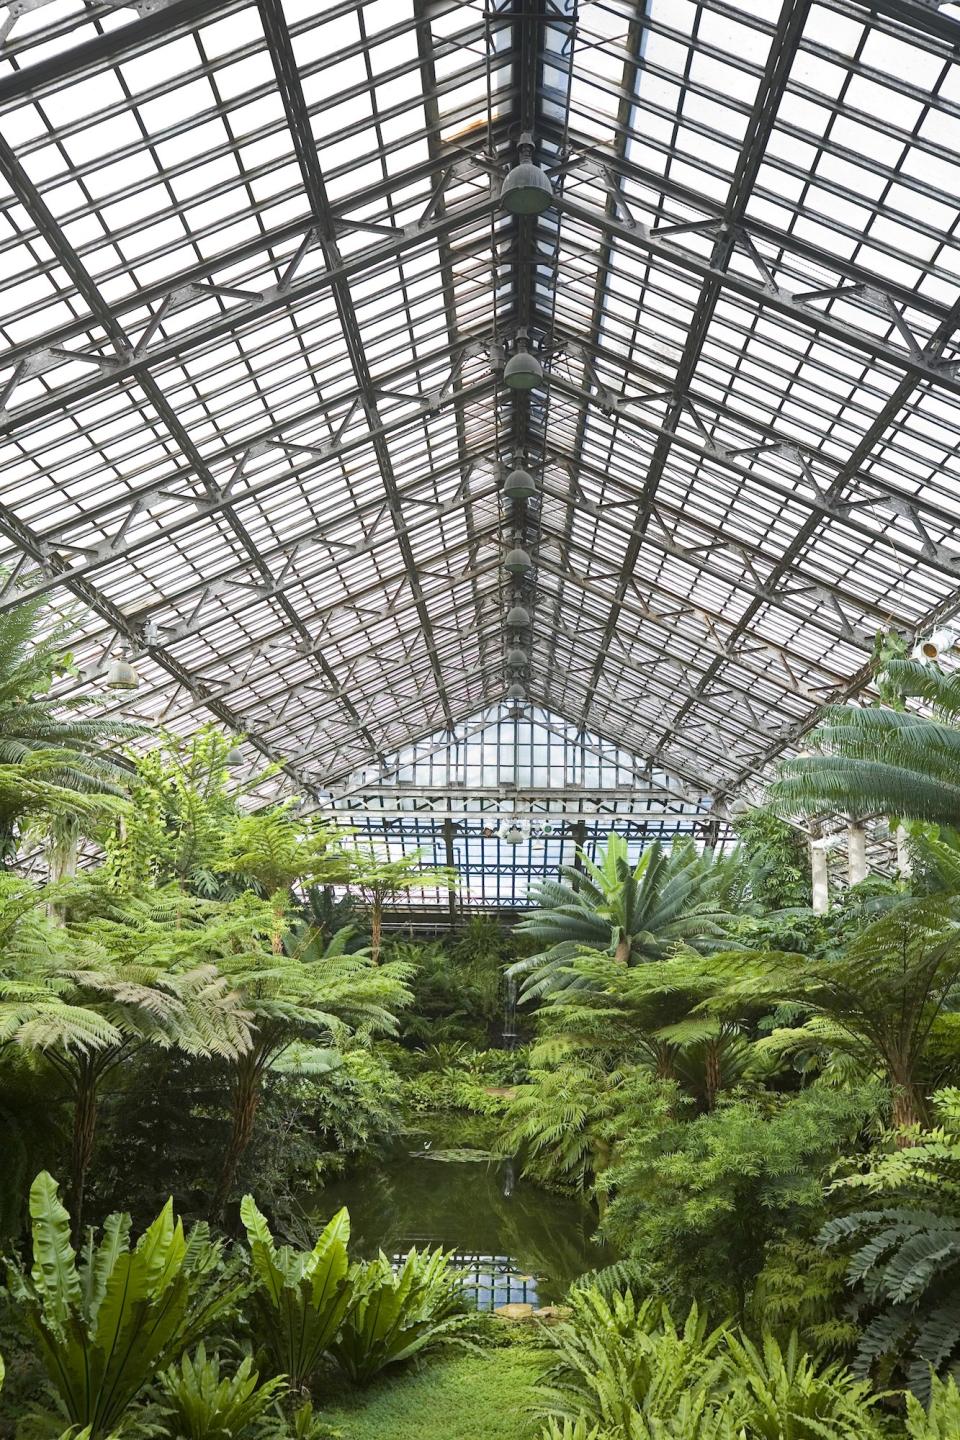 Inside of the Garfield Park Conservatory is located in the East Garfield Park neighborhood on Chicago's West Side.